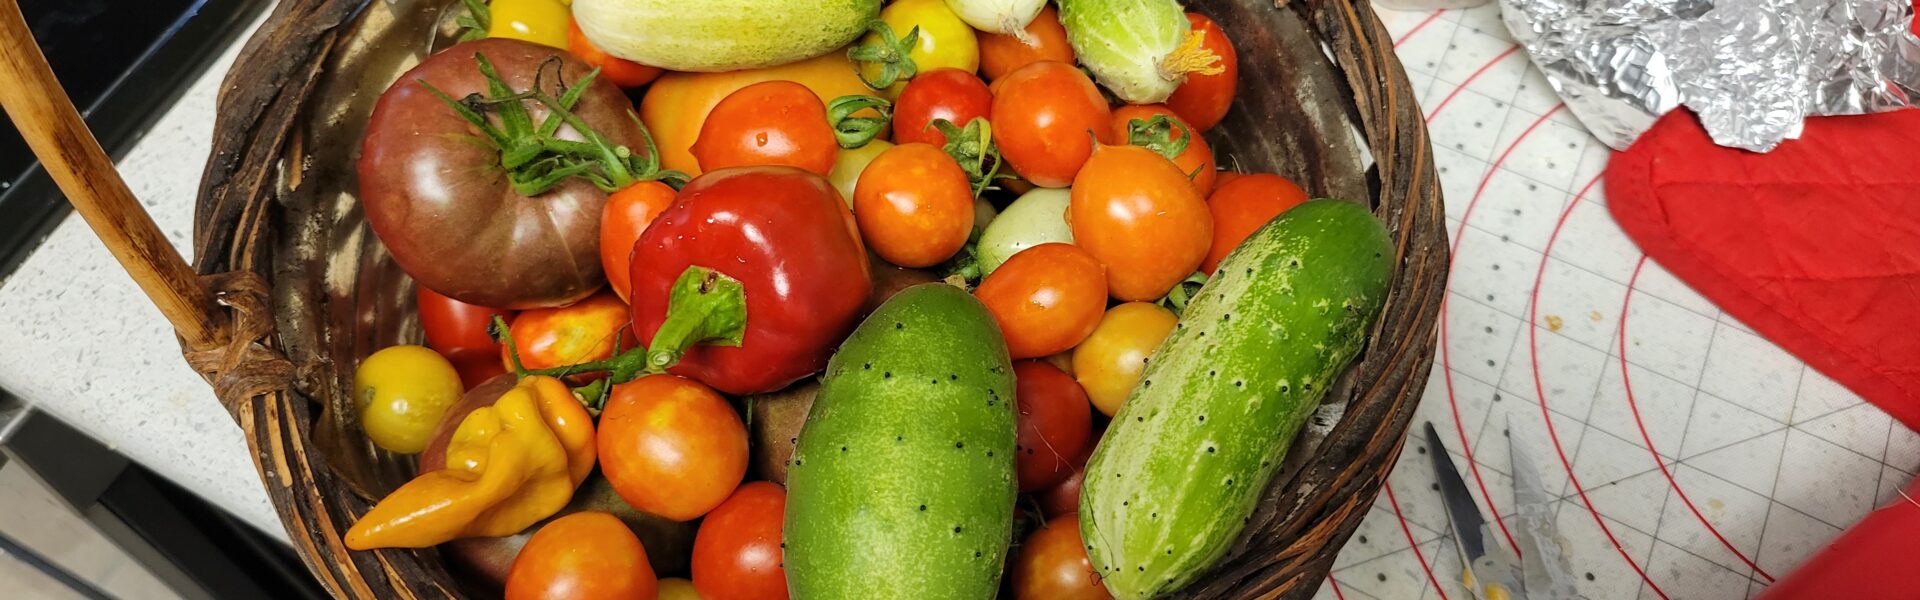 Photo of a basket full of garden-grown vegetables: cucumbers, peppers, tomatoes.